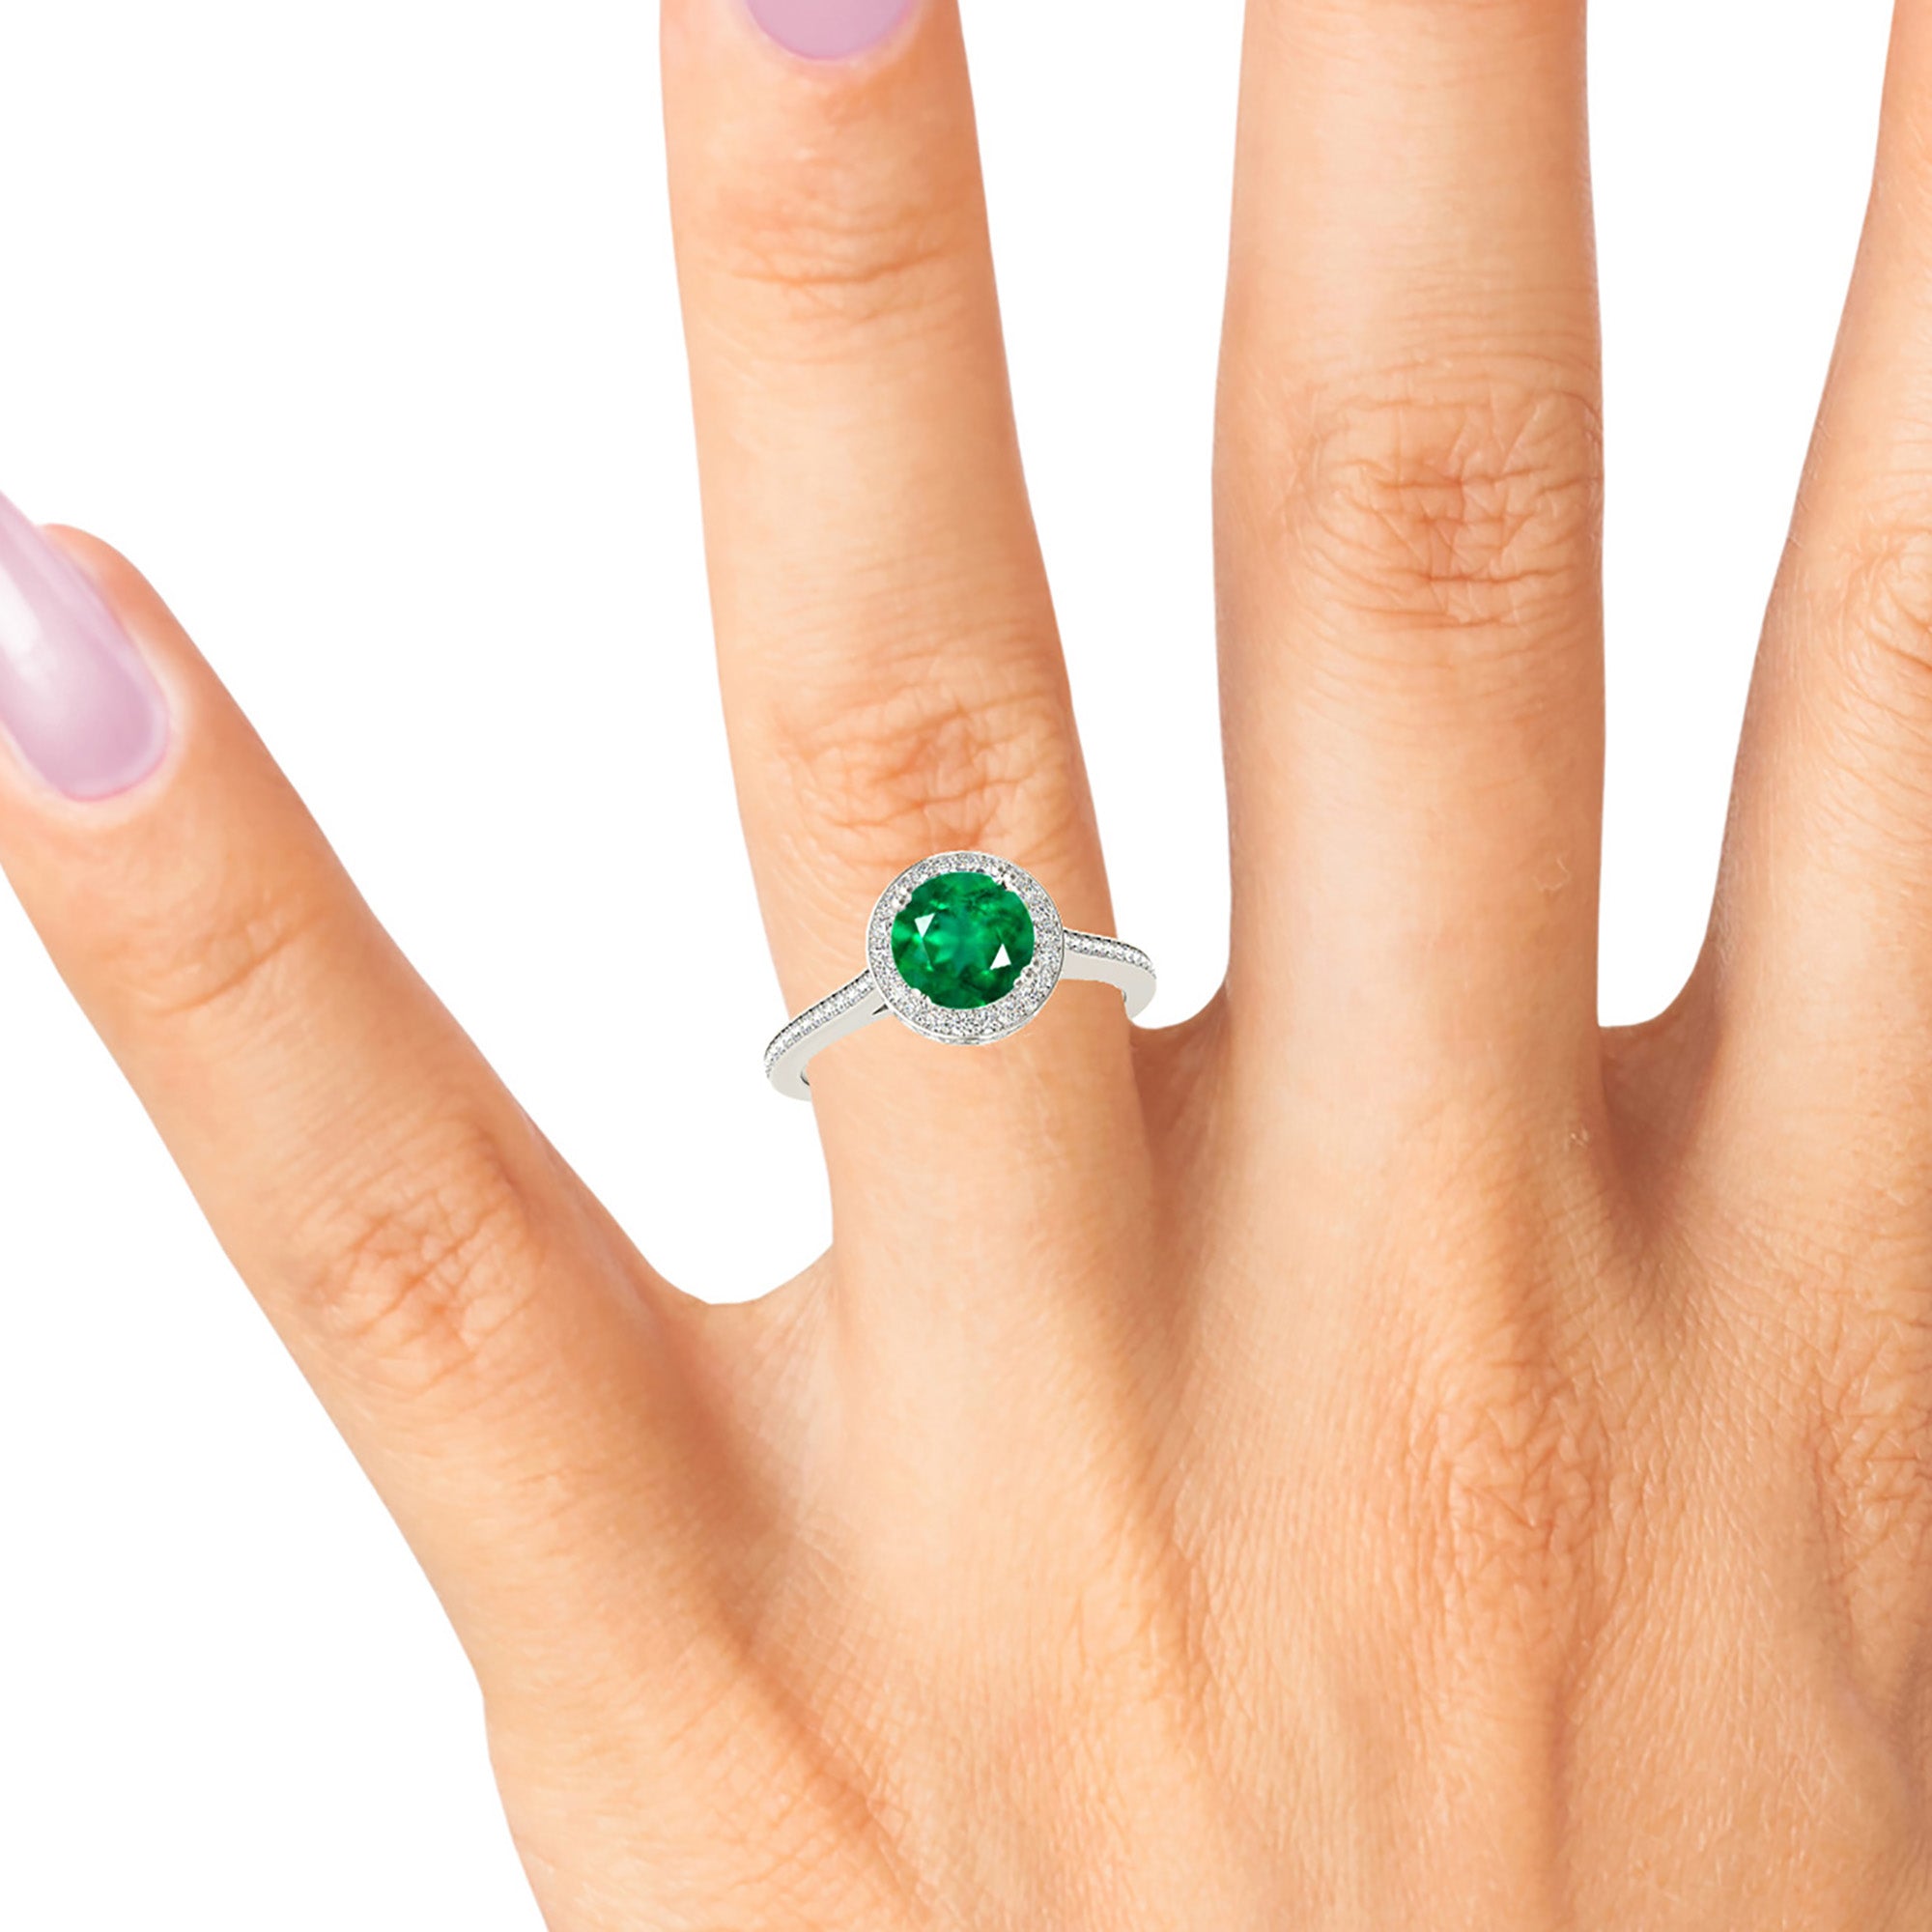 2.00 ct. Genuine Emerald Halo Ring With 0.50 ctw. Under Halo Side Diamonds-in 14K/18K White, Yellow, Rose Gold and Platinum - Christmas Jewelry Gift -VIRABYANI